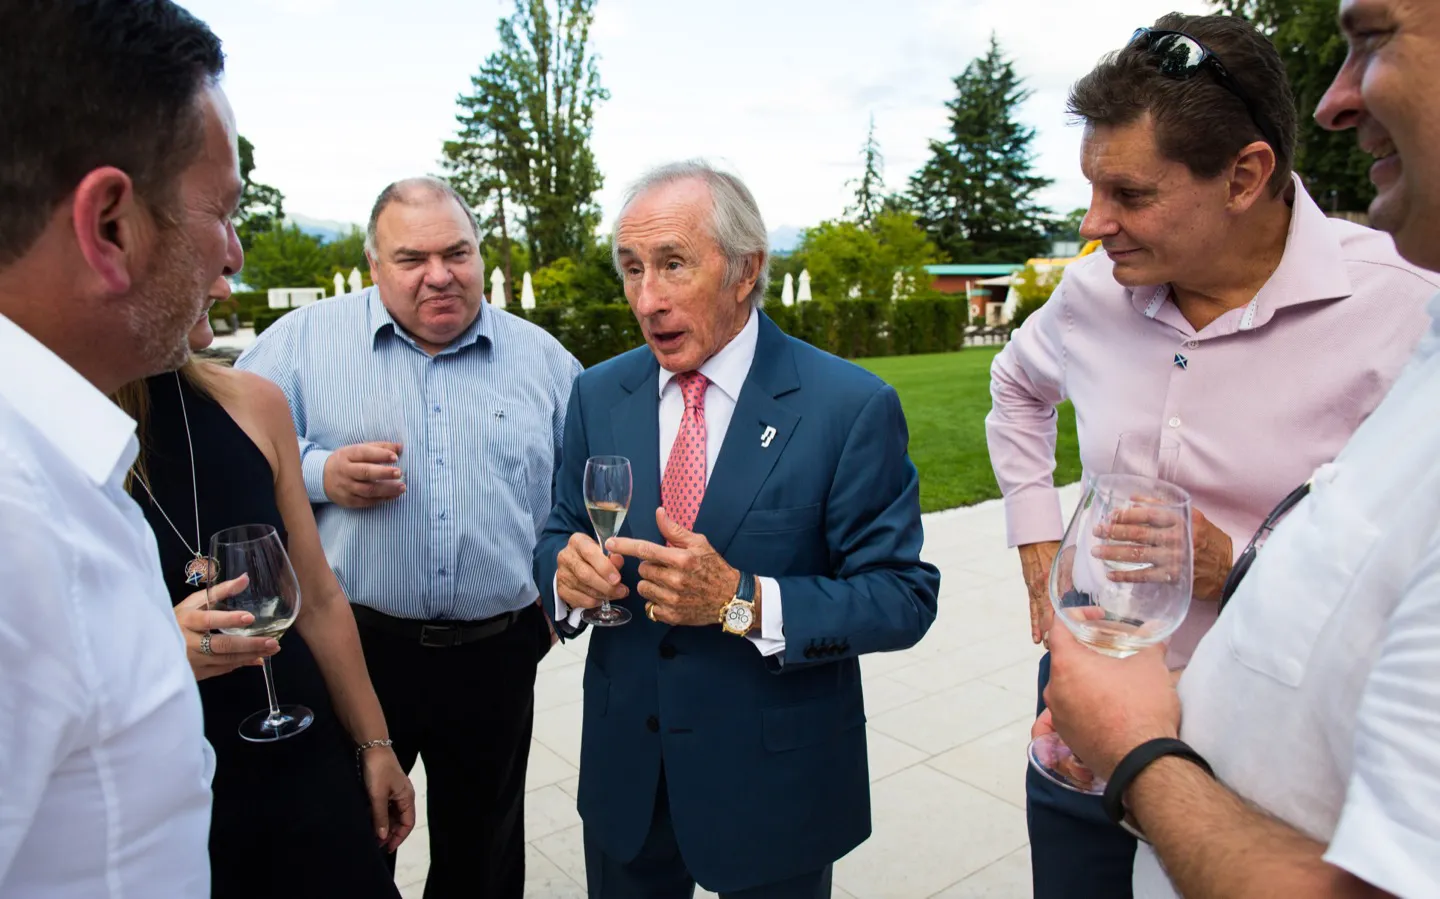 Enjoy dinner with three-time F1 Champion Sir Jackie Stewart on the ultimate F1 tour